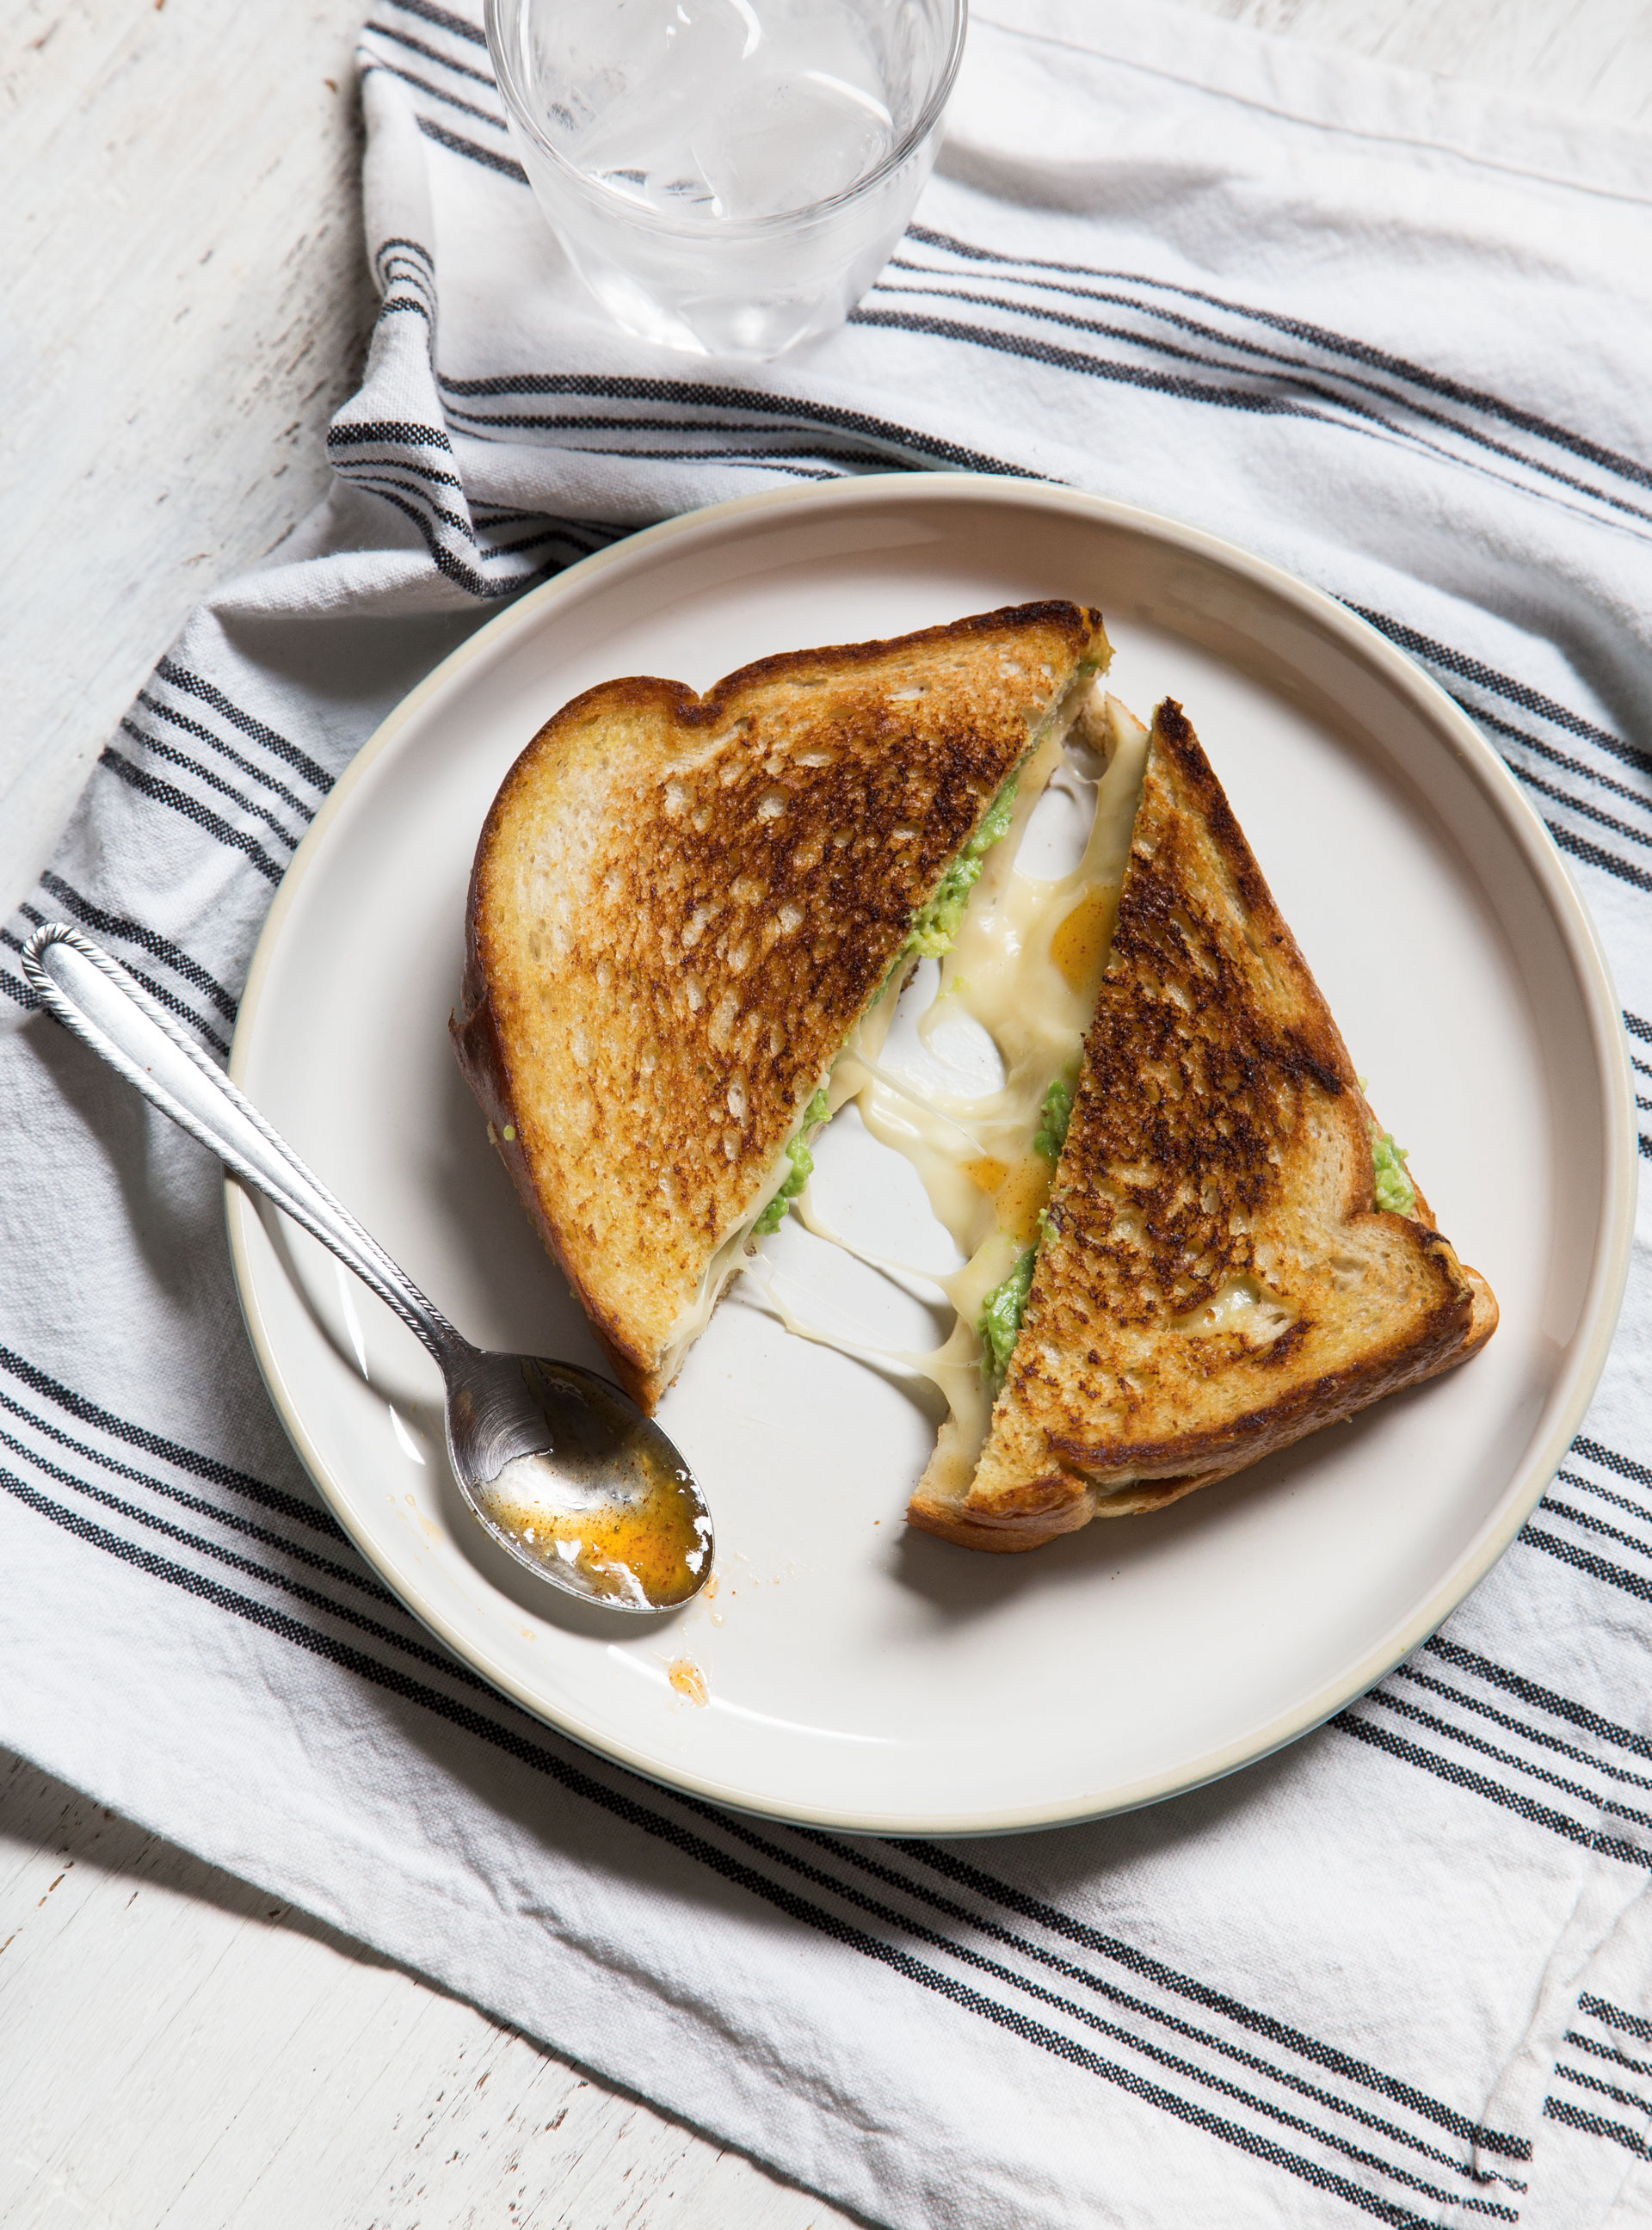 Grilled Cheese Sandwich with Avocado